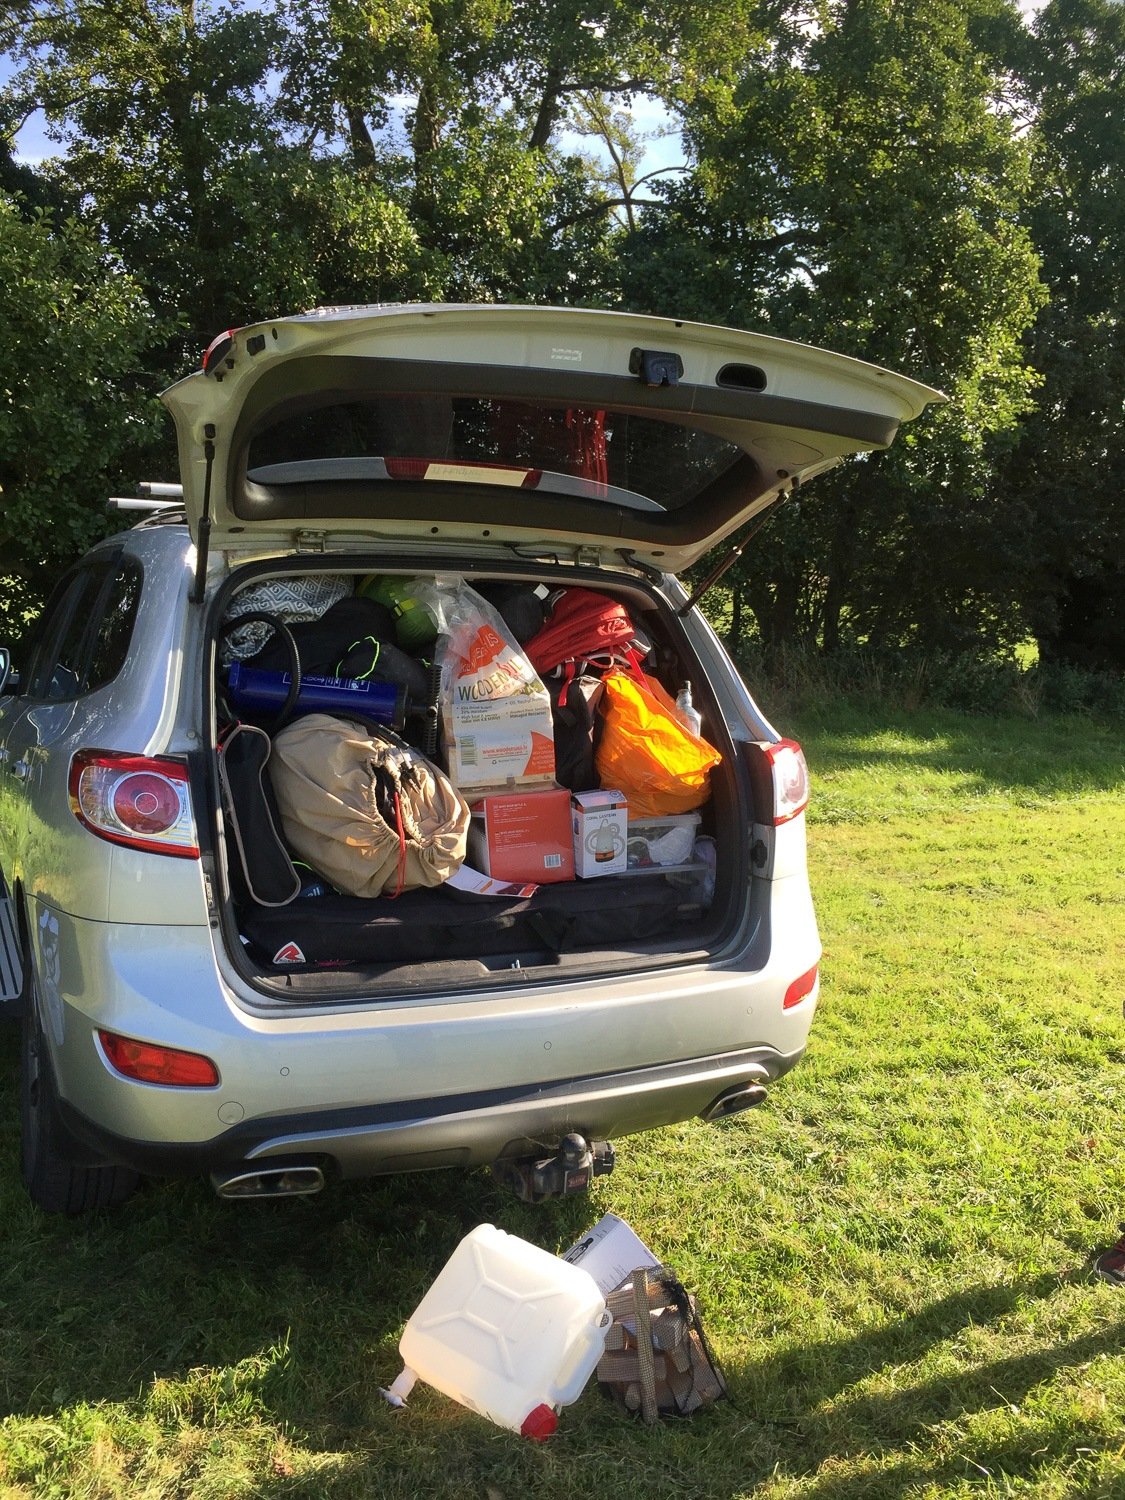 Car packed with camping gear